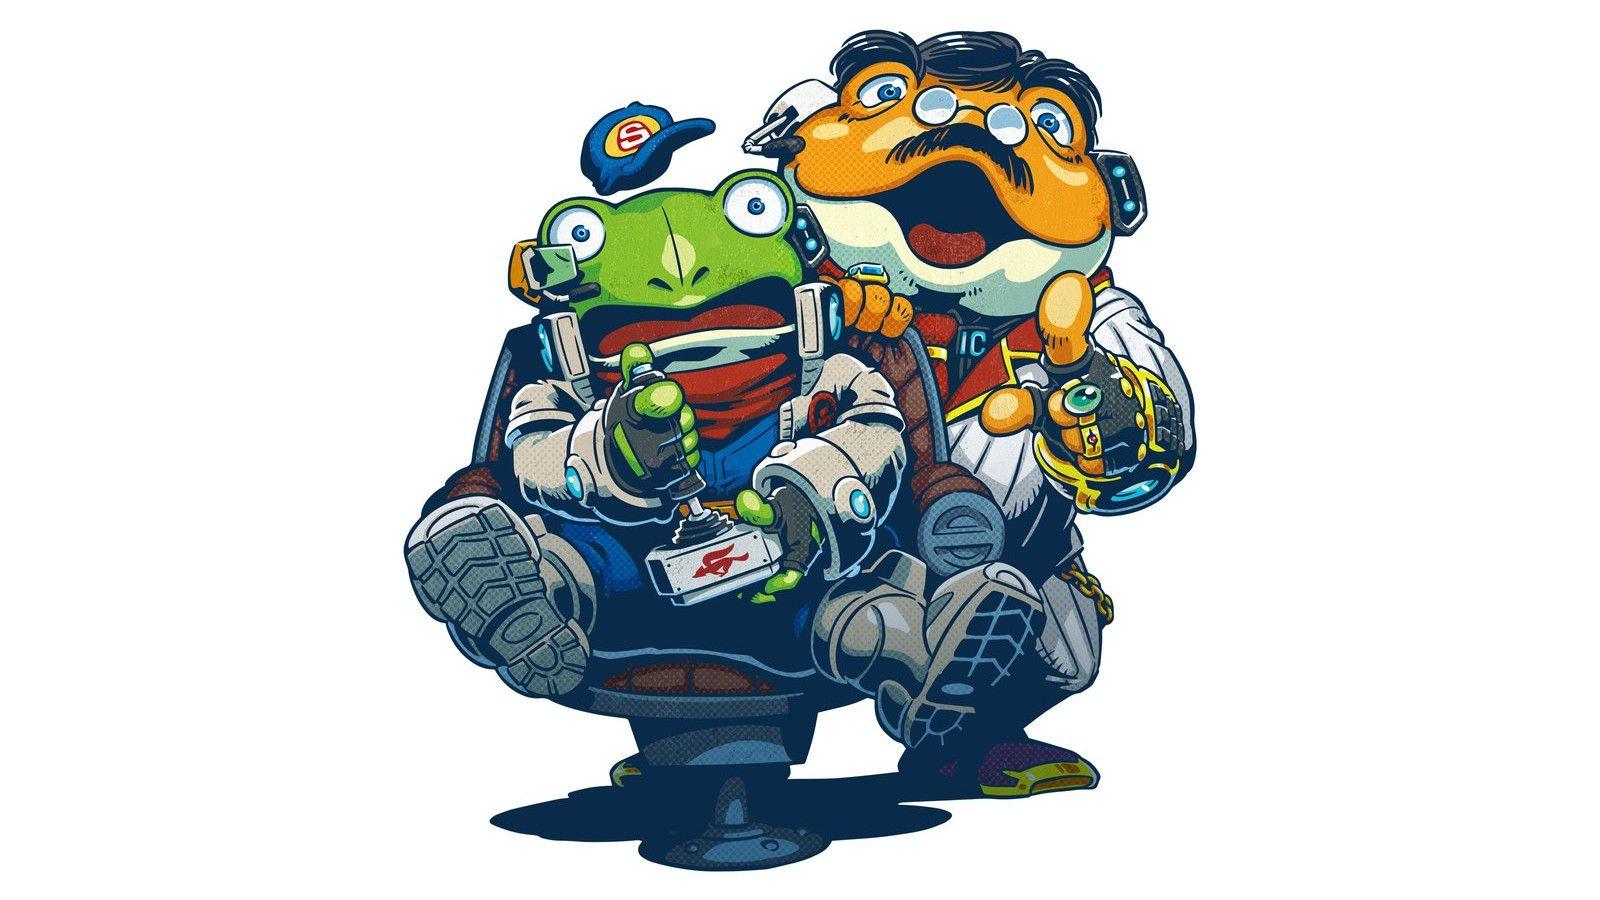 Star Fox Guard lets you play as Slippy Toad's CCTV